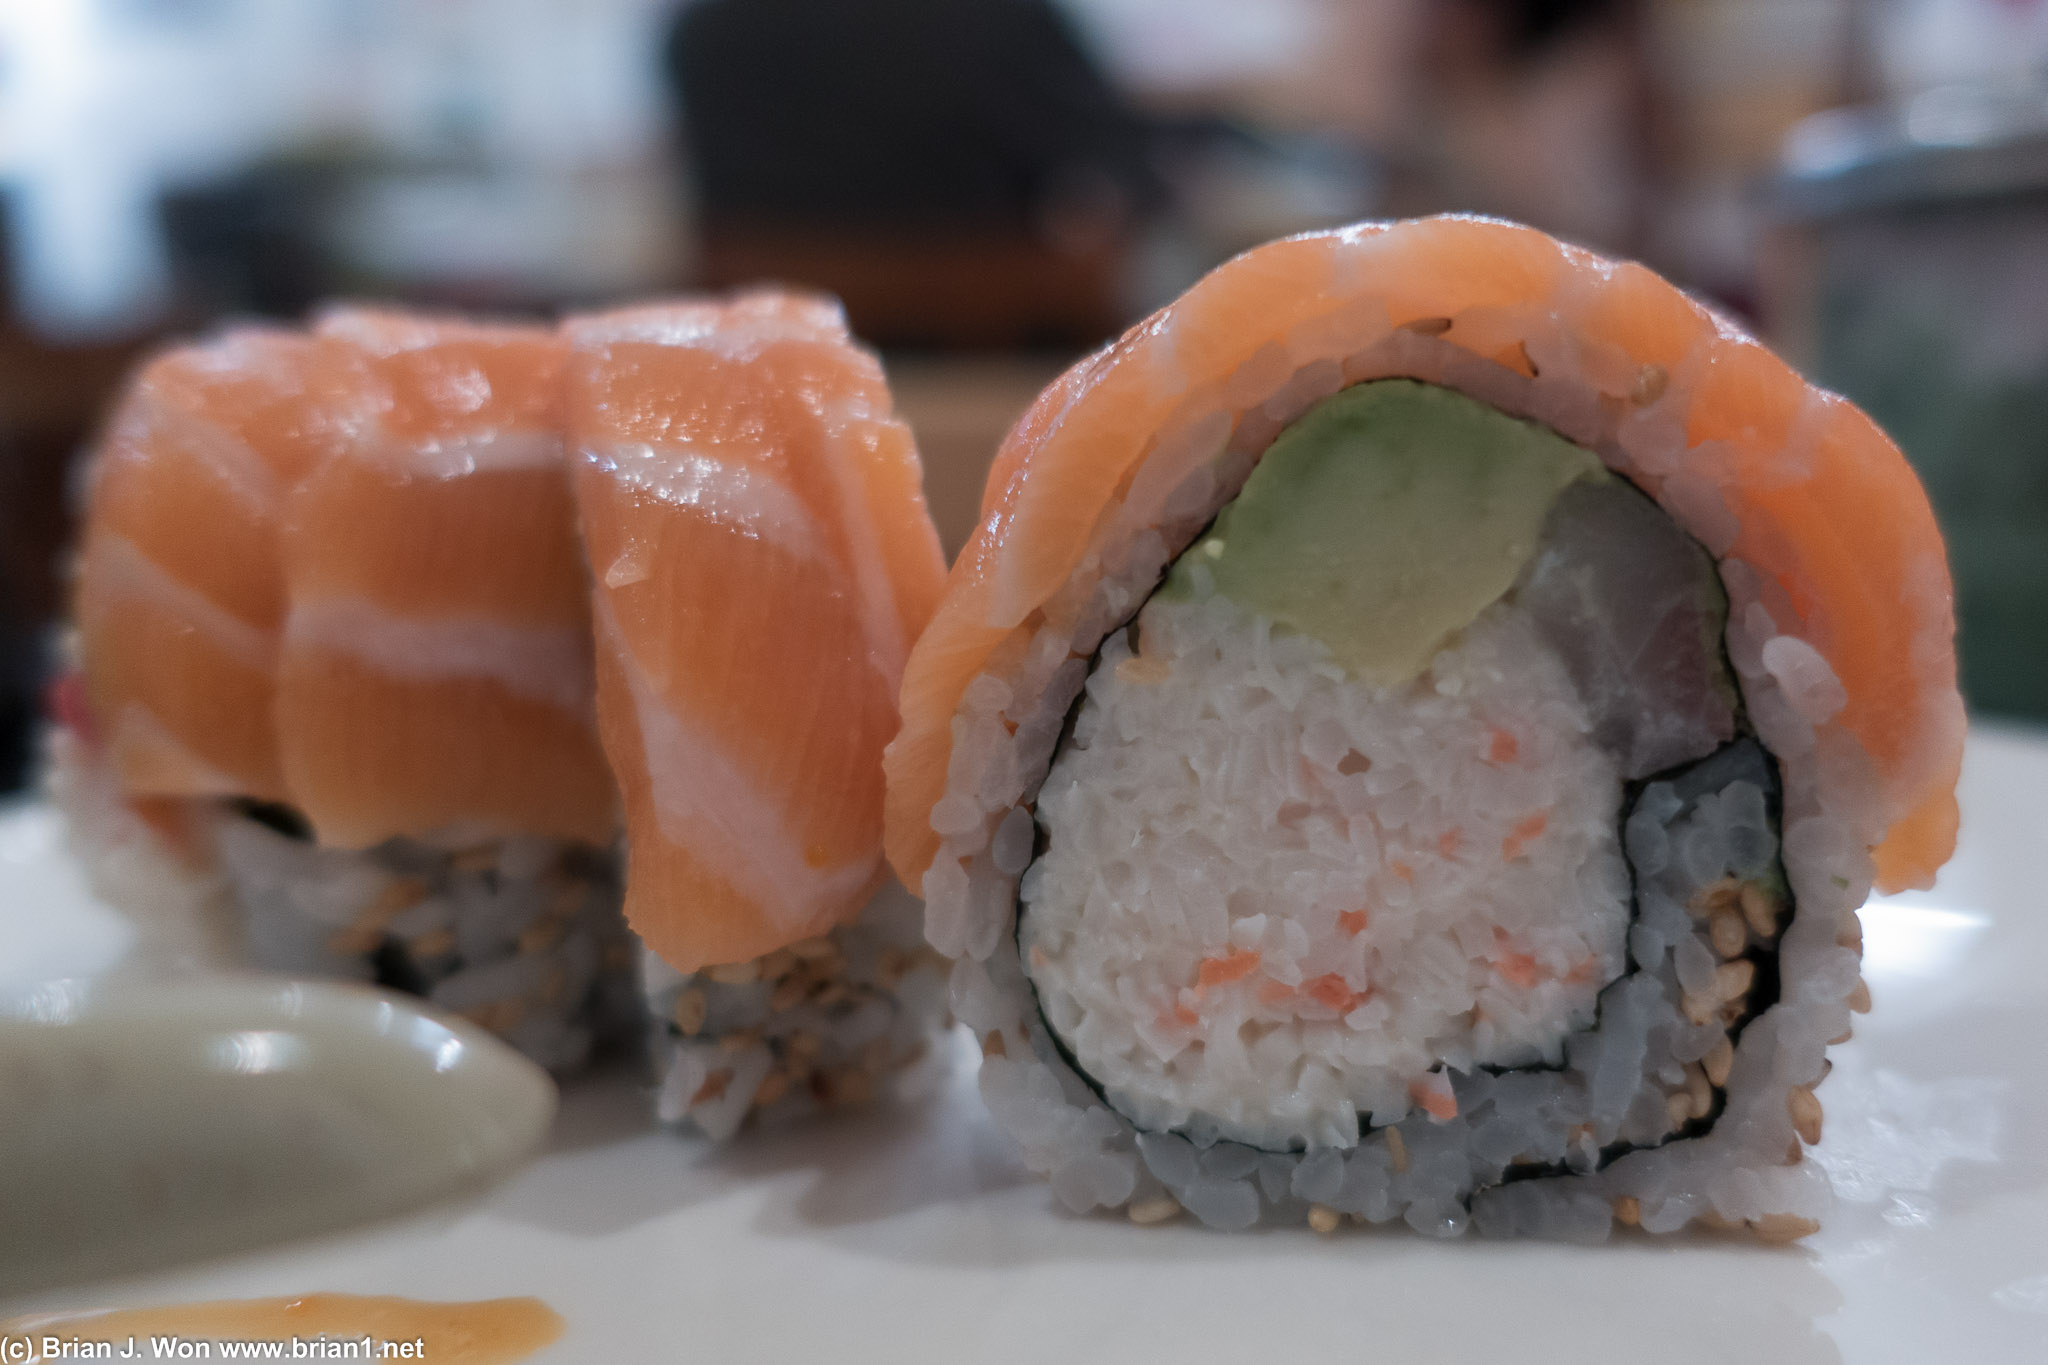 Greg roll-- california roll basically, with a bit more fish inside and on top.